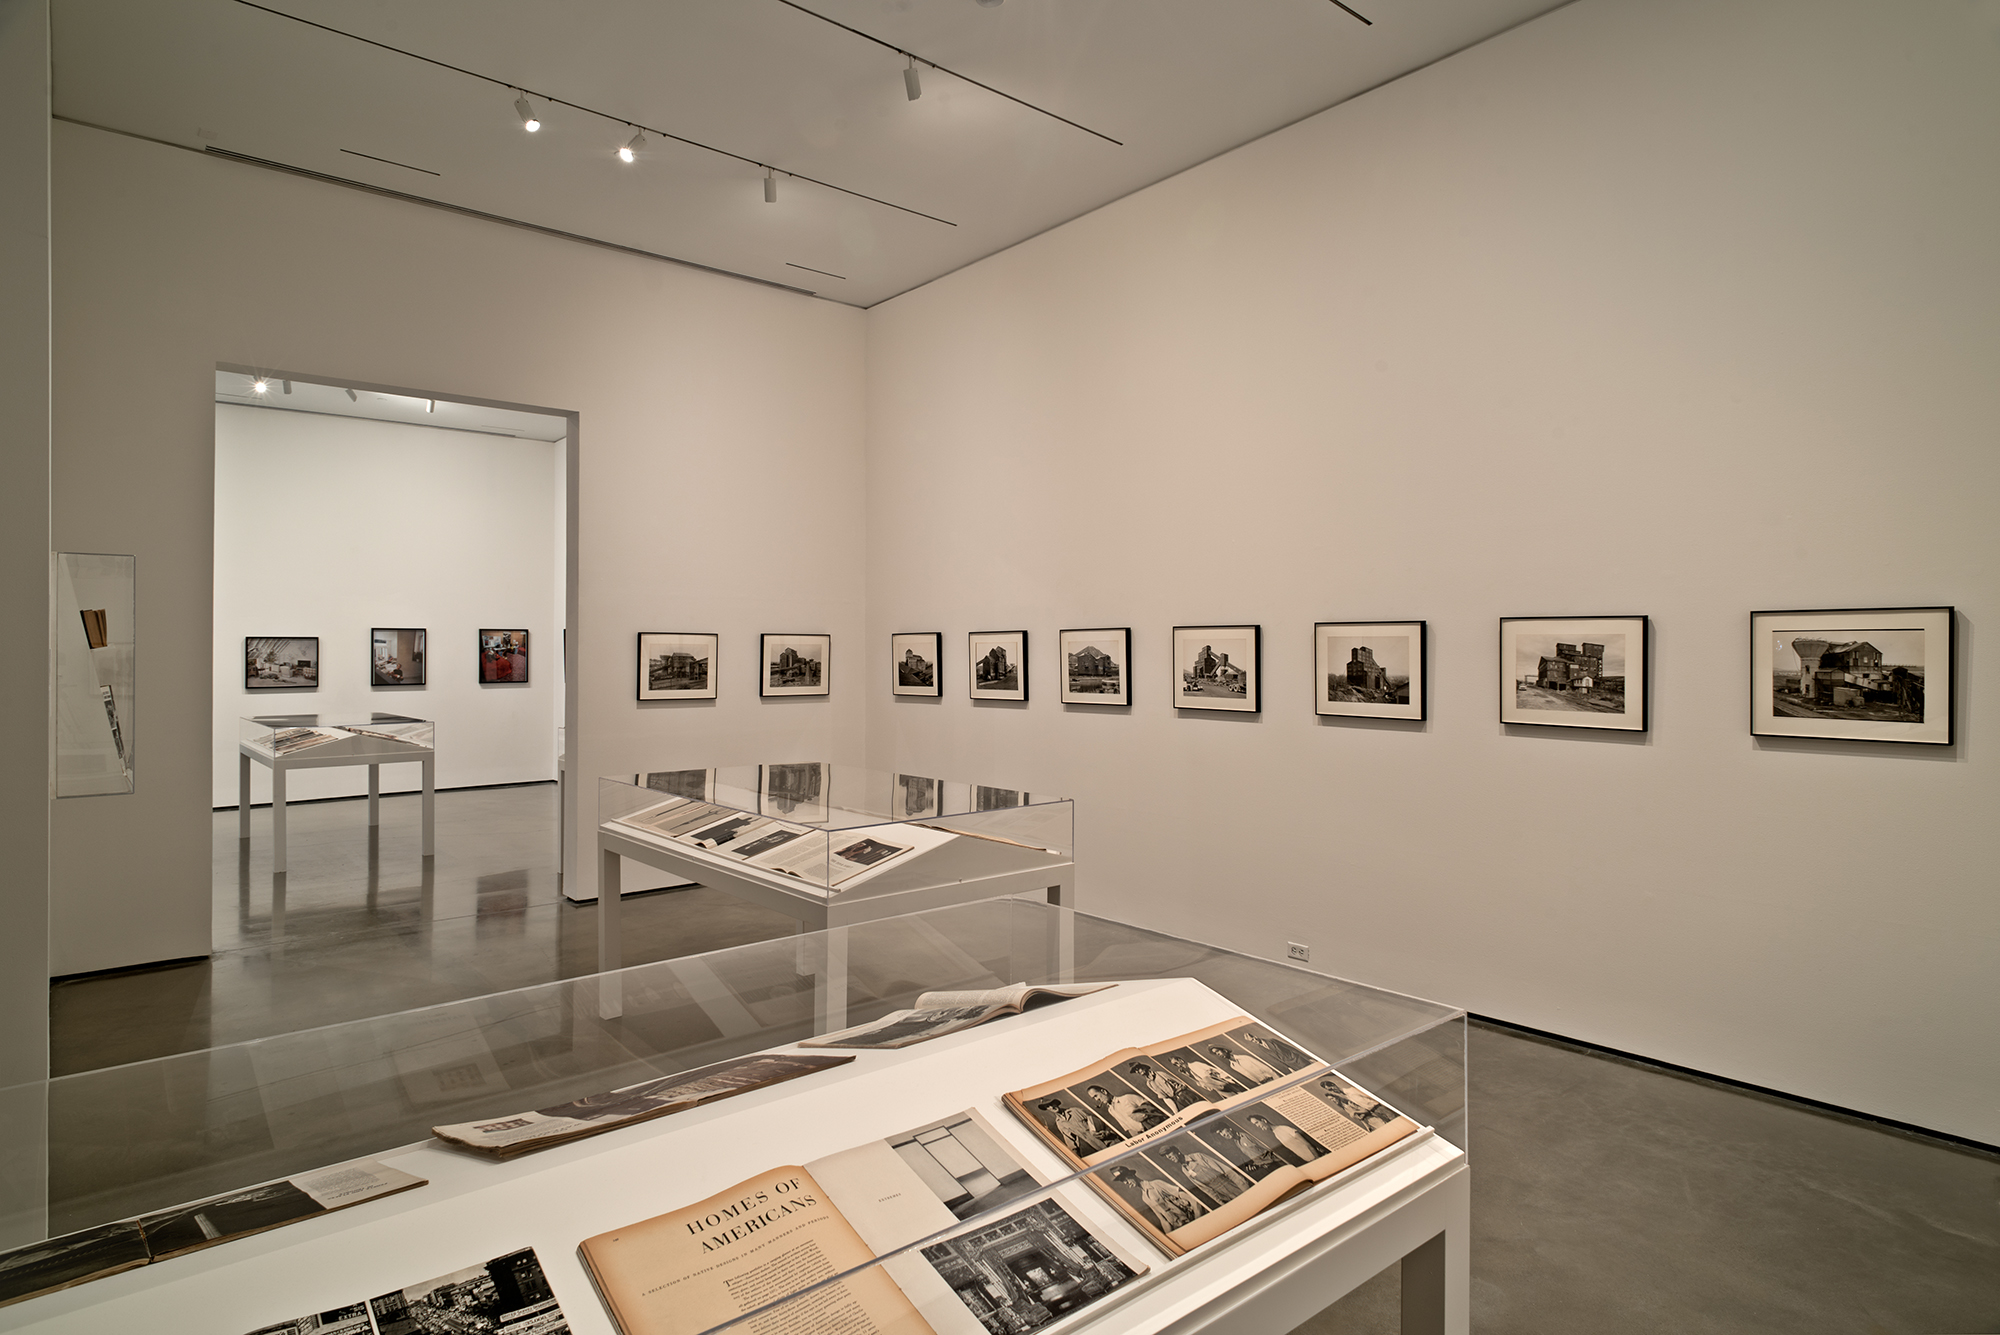   Picture Industry , Hessel Museum, Center for Curatorial Studies, Bard College, Annandale-on-Hudson, NY, 2017.     Walker Evans, JET Magazine, Charles Moore, and Bernd and Hilla Becher    